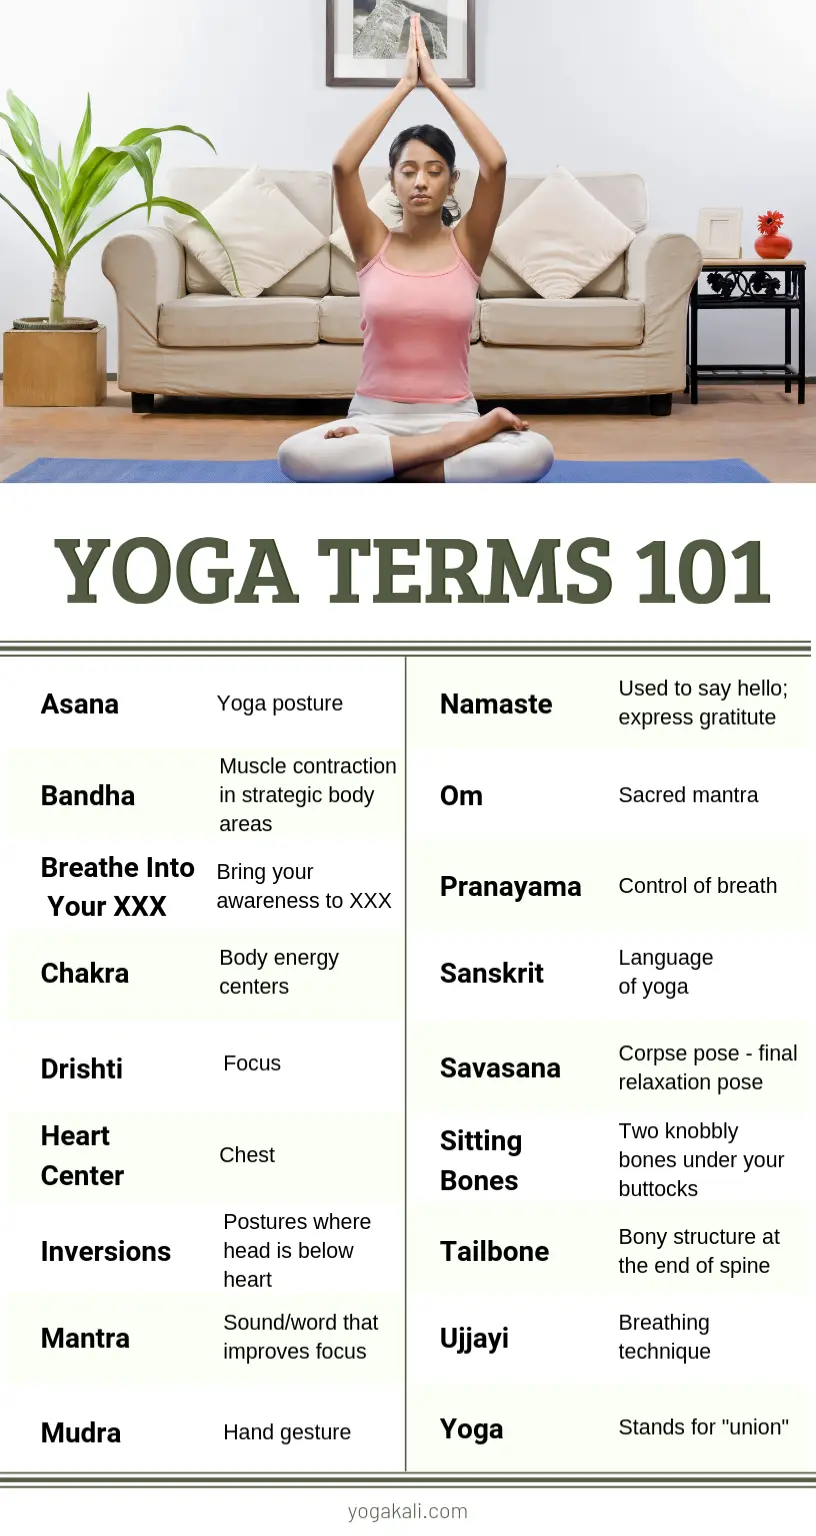 yoga terms - What are the peaceful words for yoga